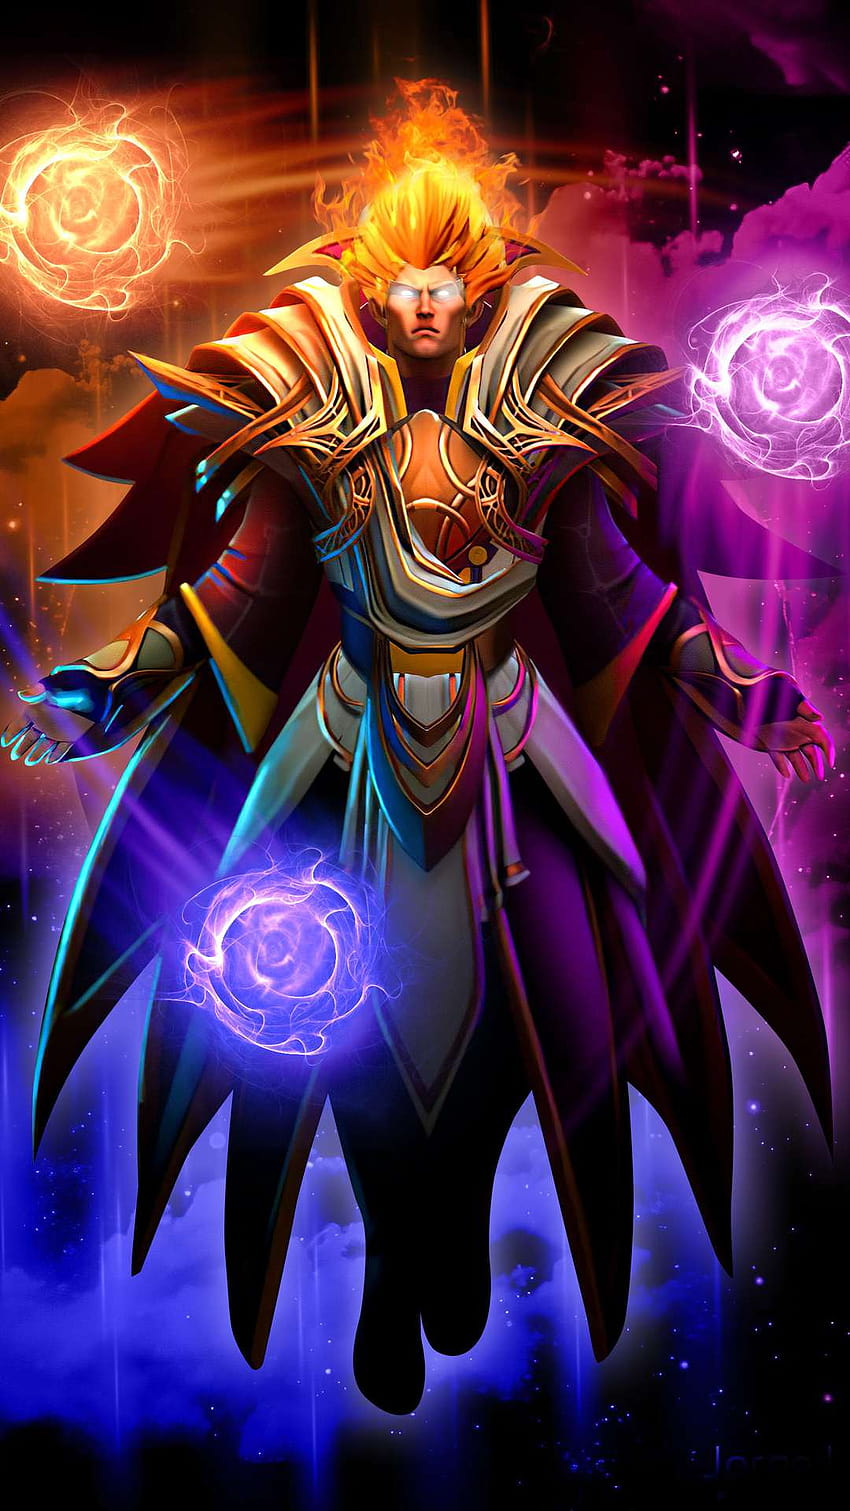 252 Dota 2 for your mobile phone by Mary Phillips, dota 2 invoker HD phone wallpaper